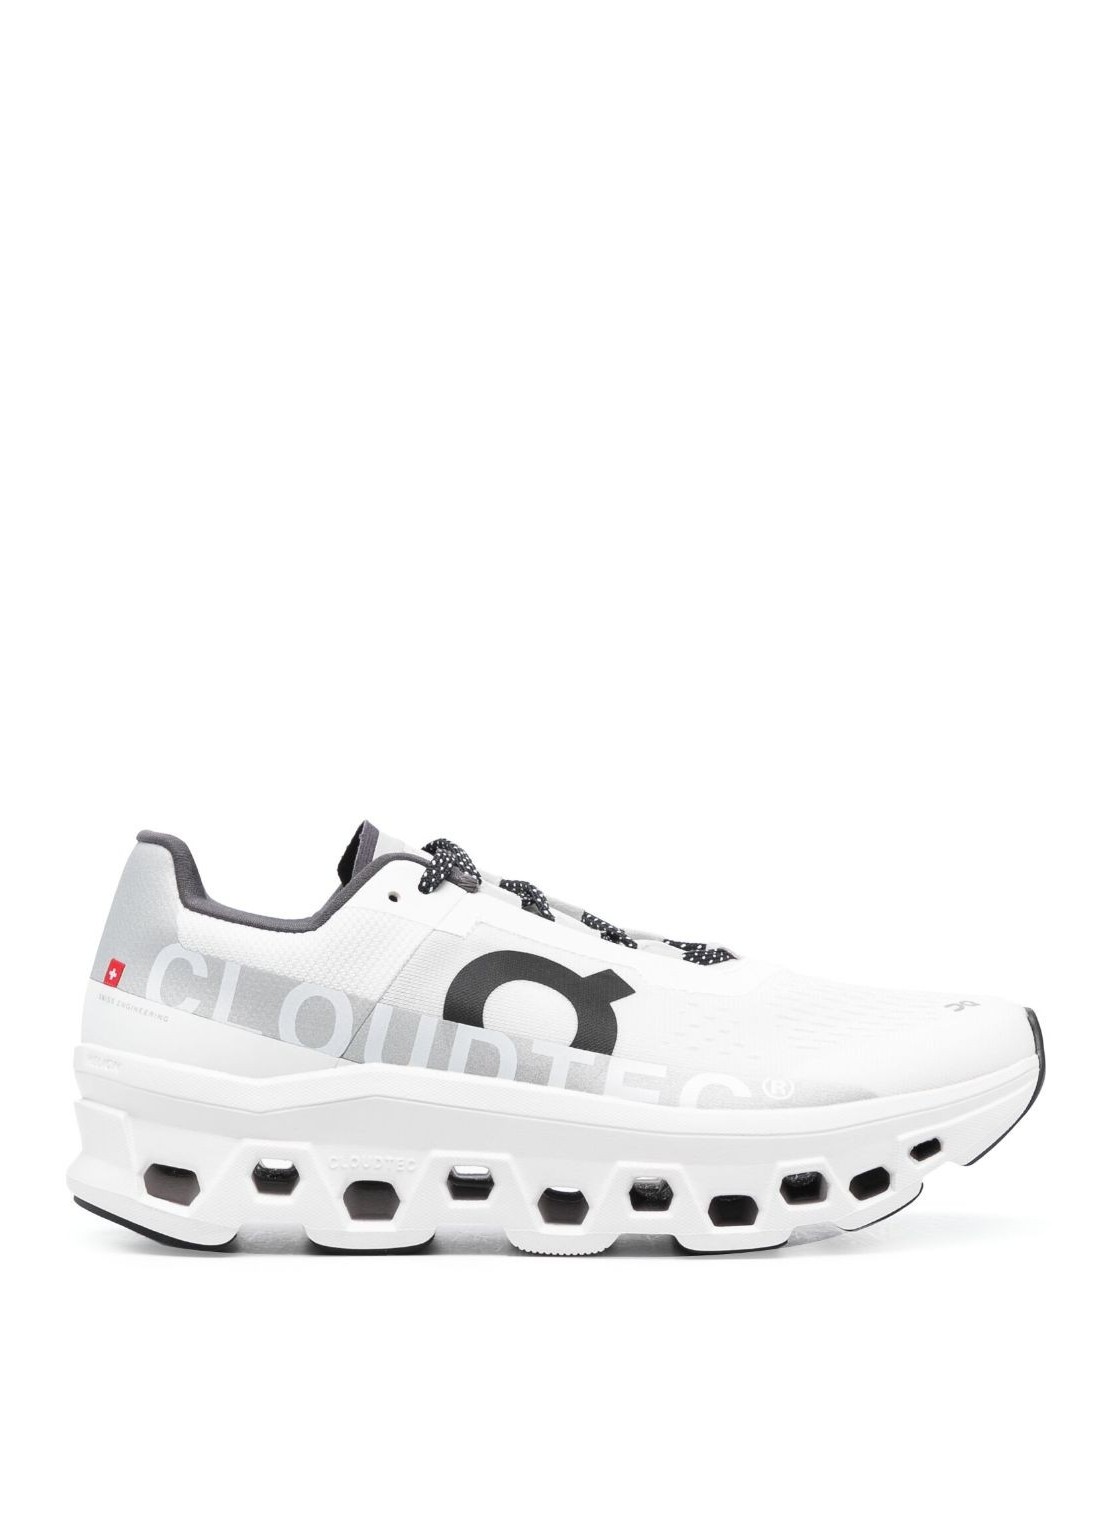 Sneaker on running sneaker man cloudmonster exclusive 6198288 undyed white white talla 44
 